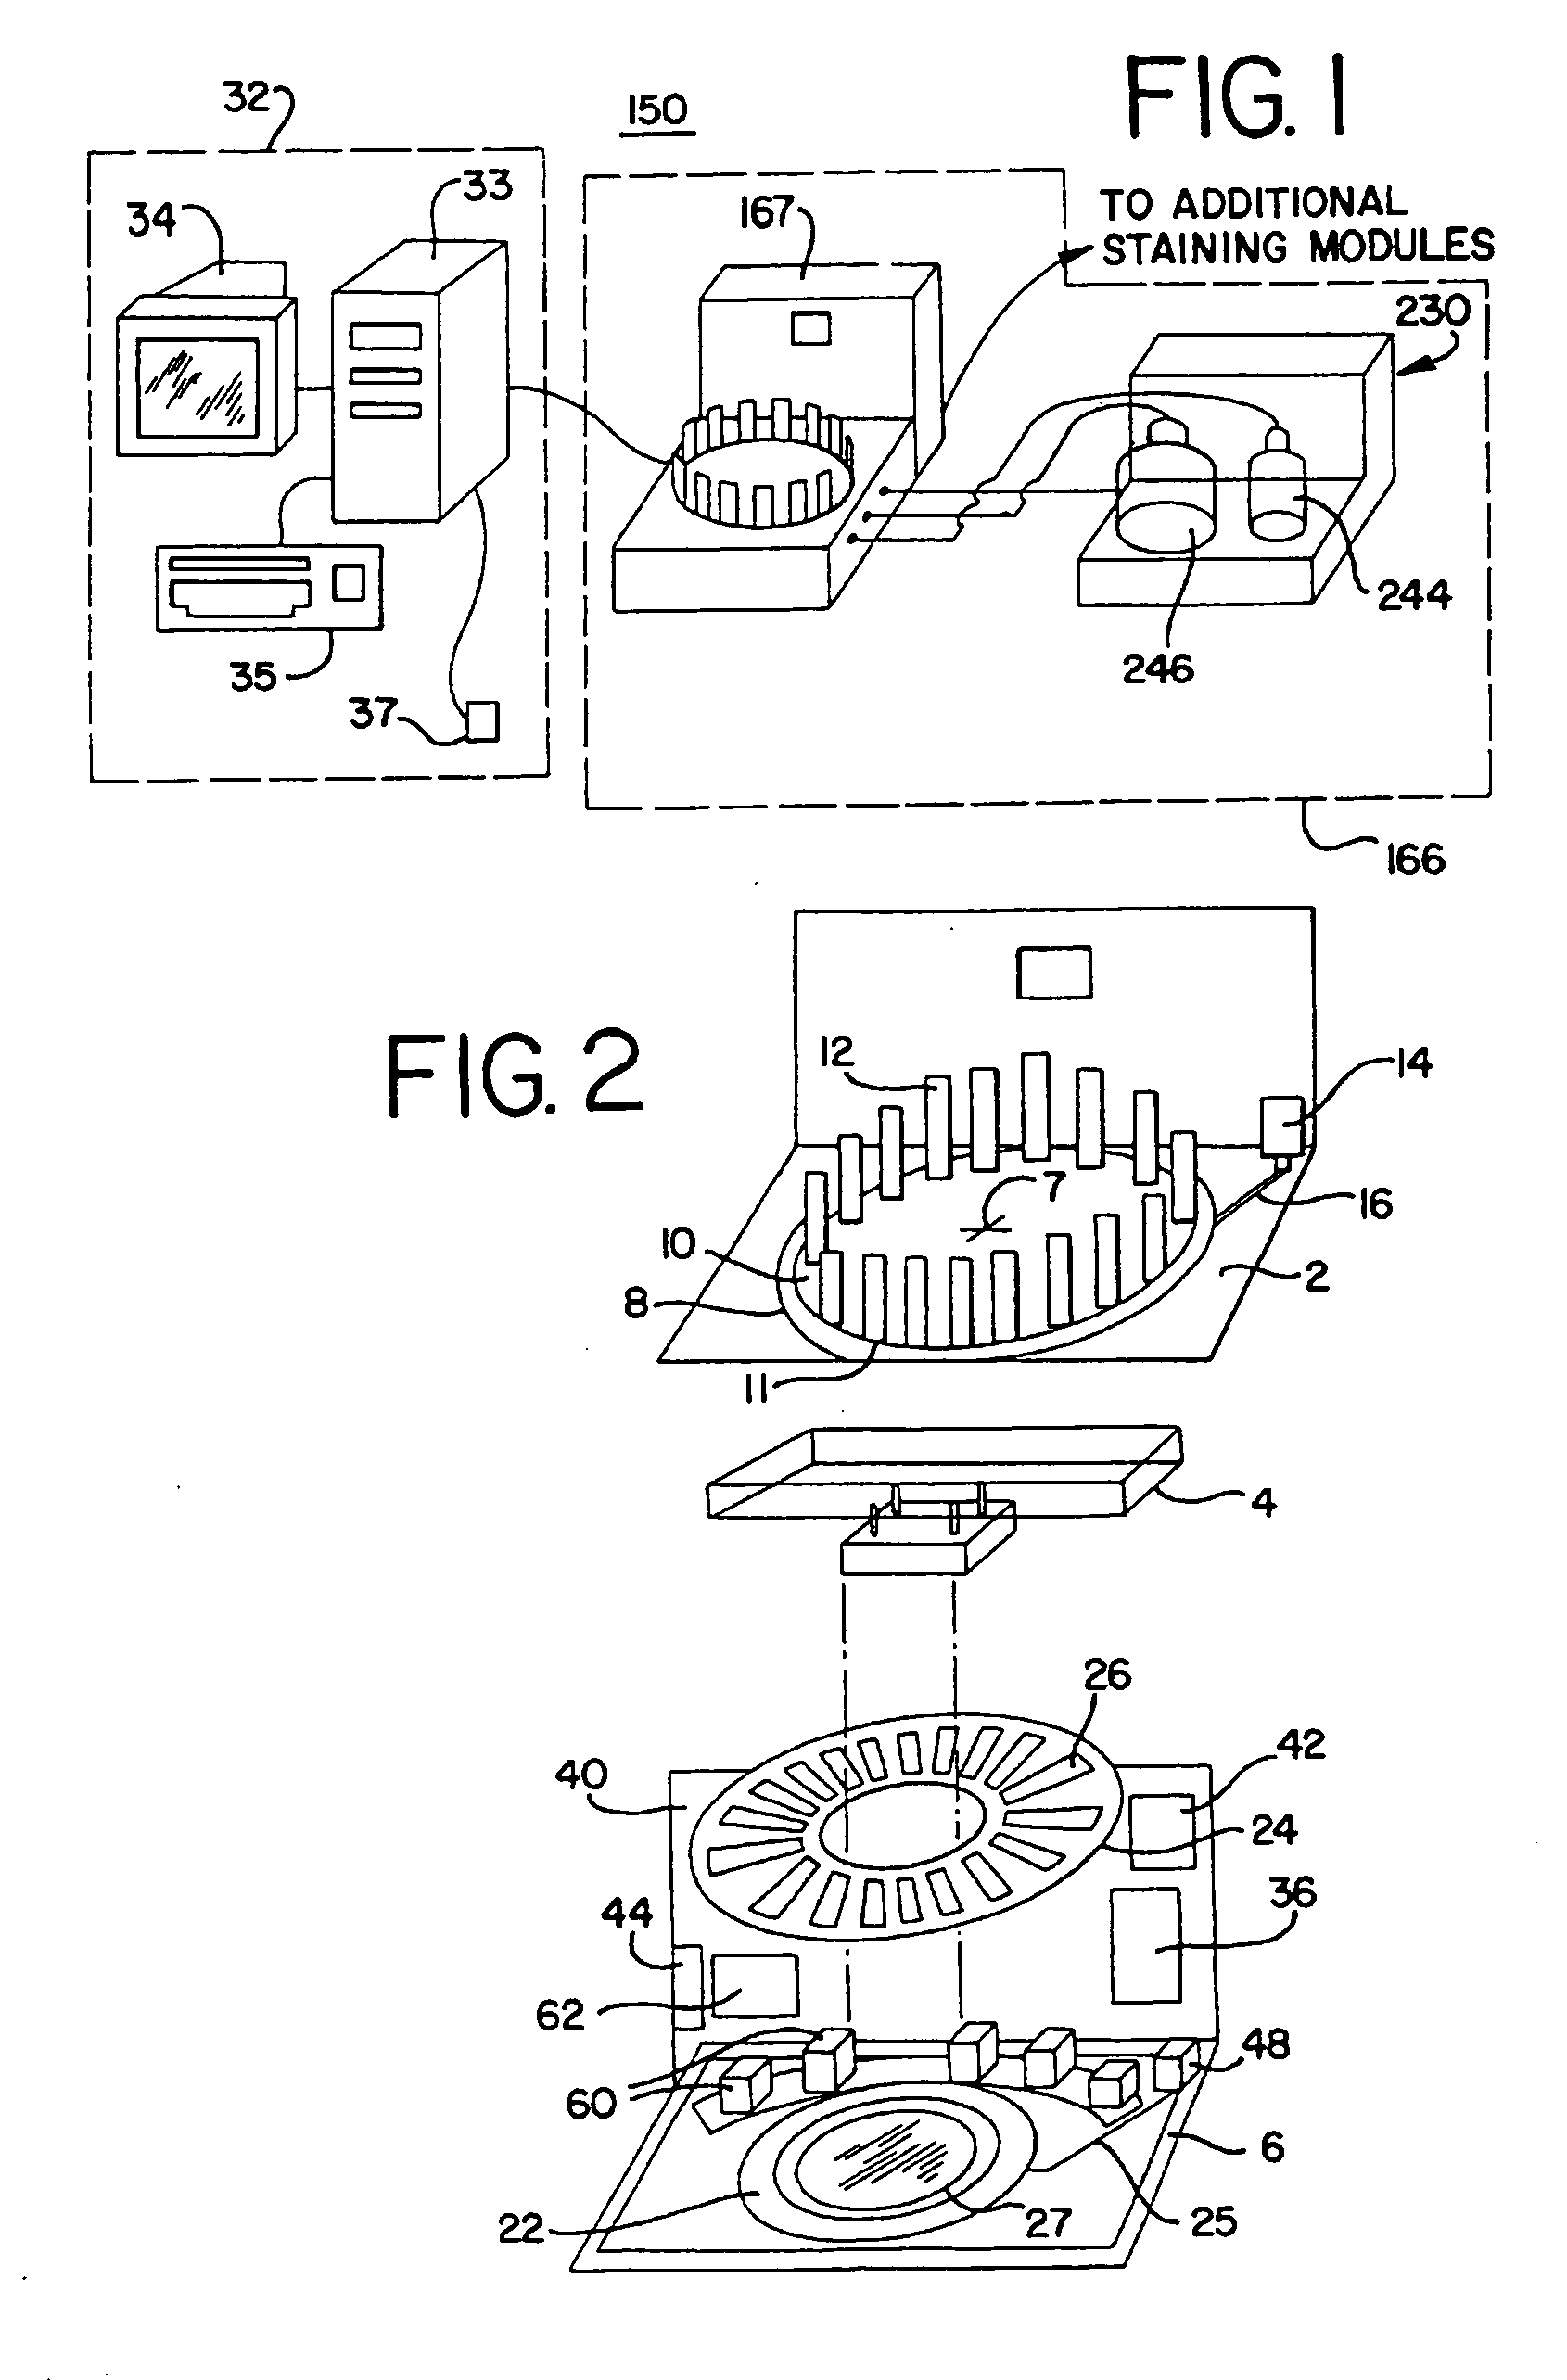 Memory management method and apparatus for automated biological reaction system